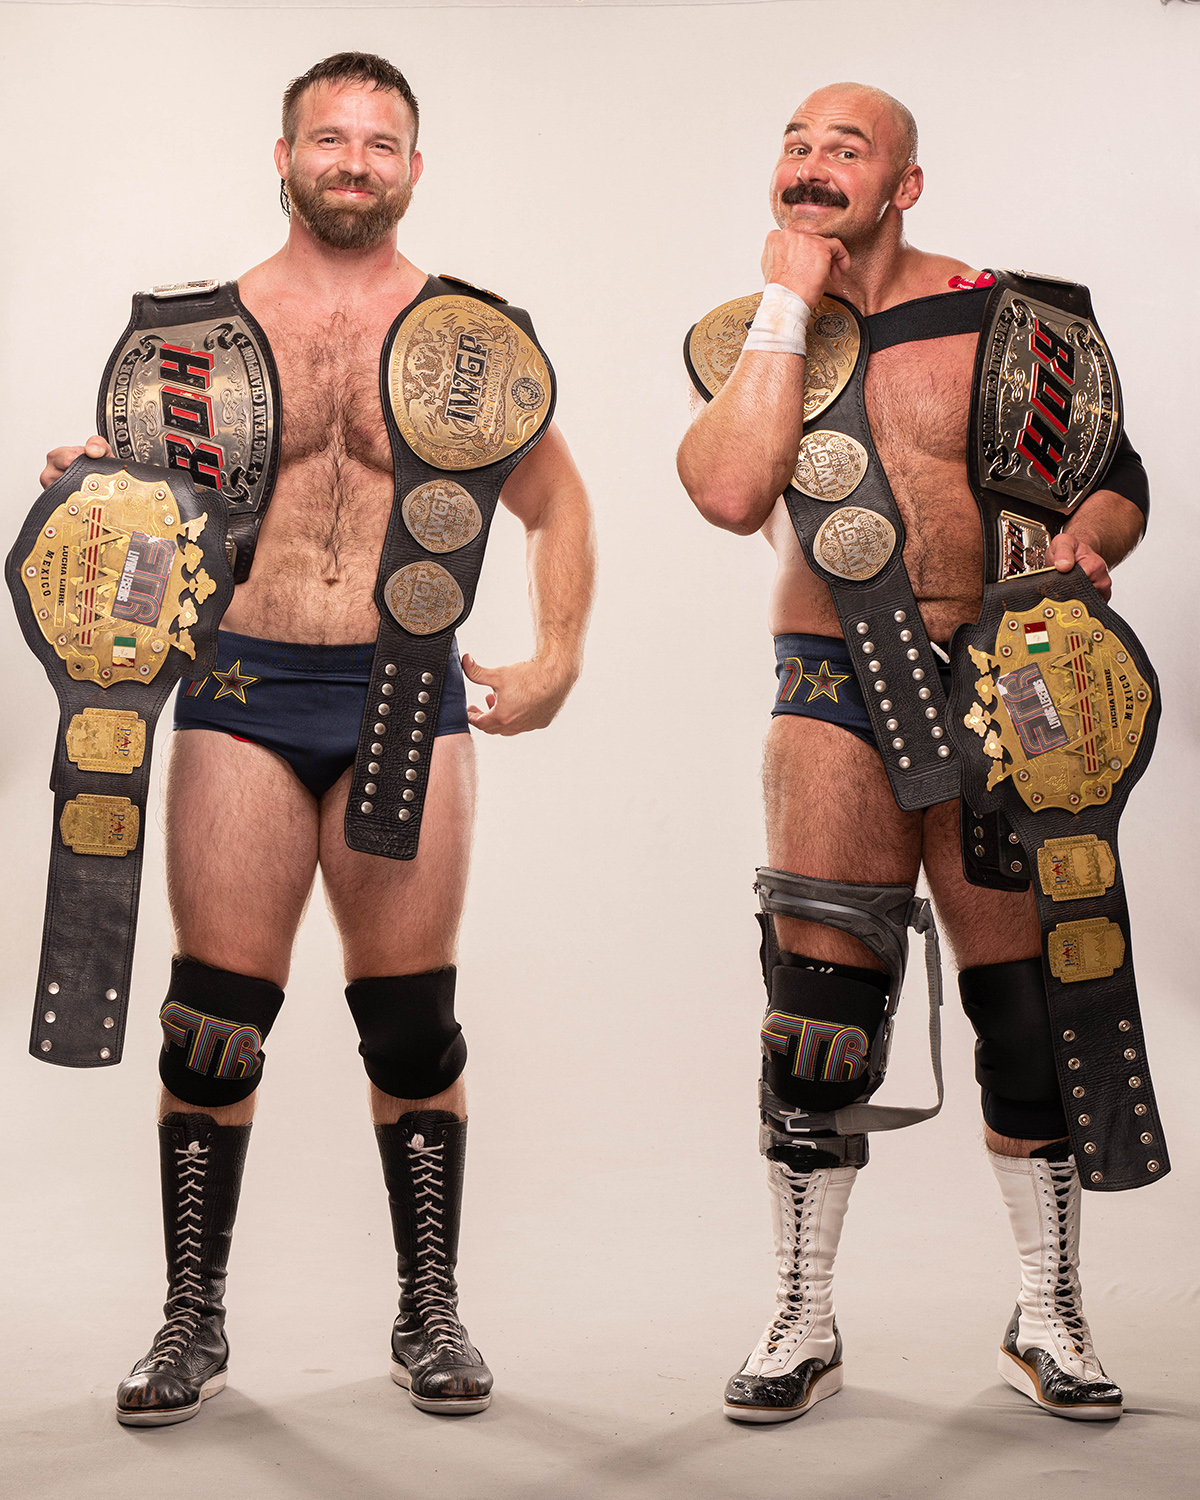 Lucha Bros Retain The ROH Tag Team Titles In The AEW Dynamite Main